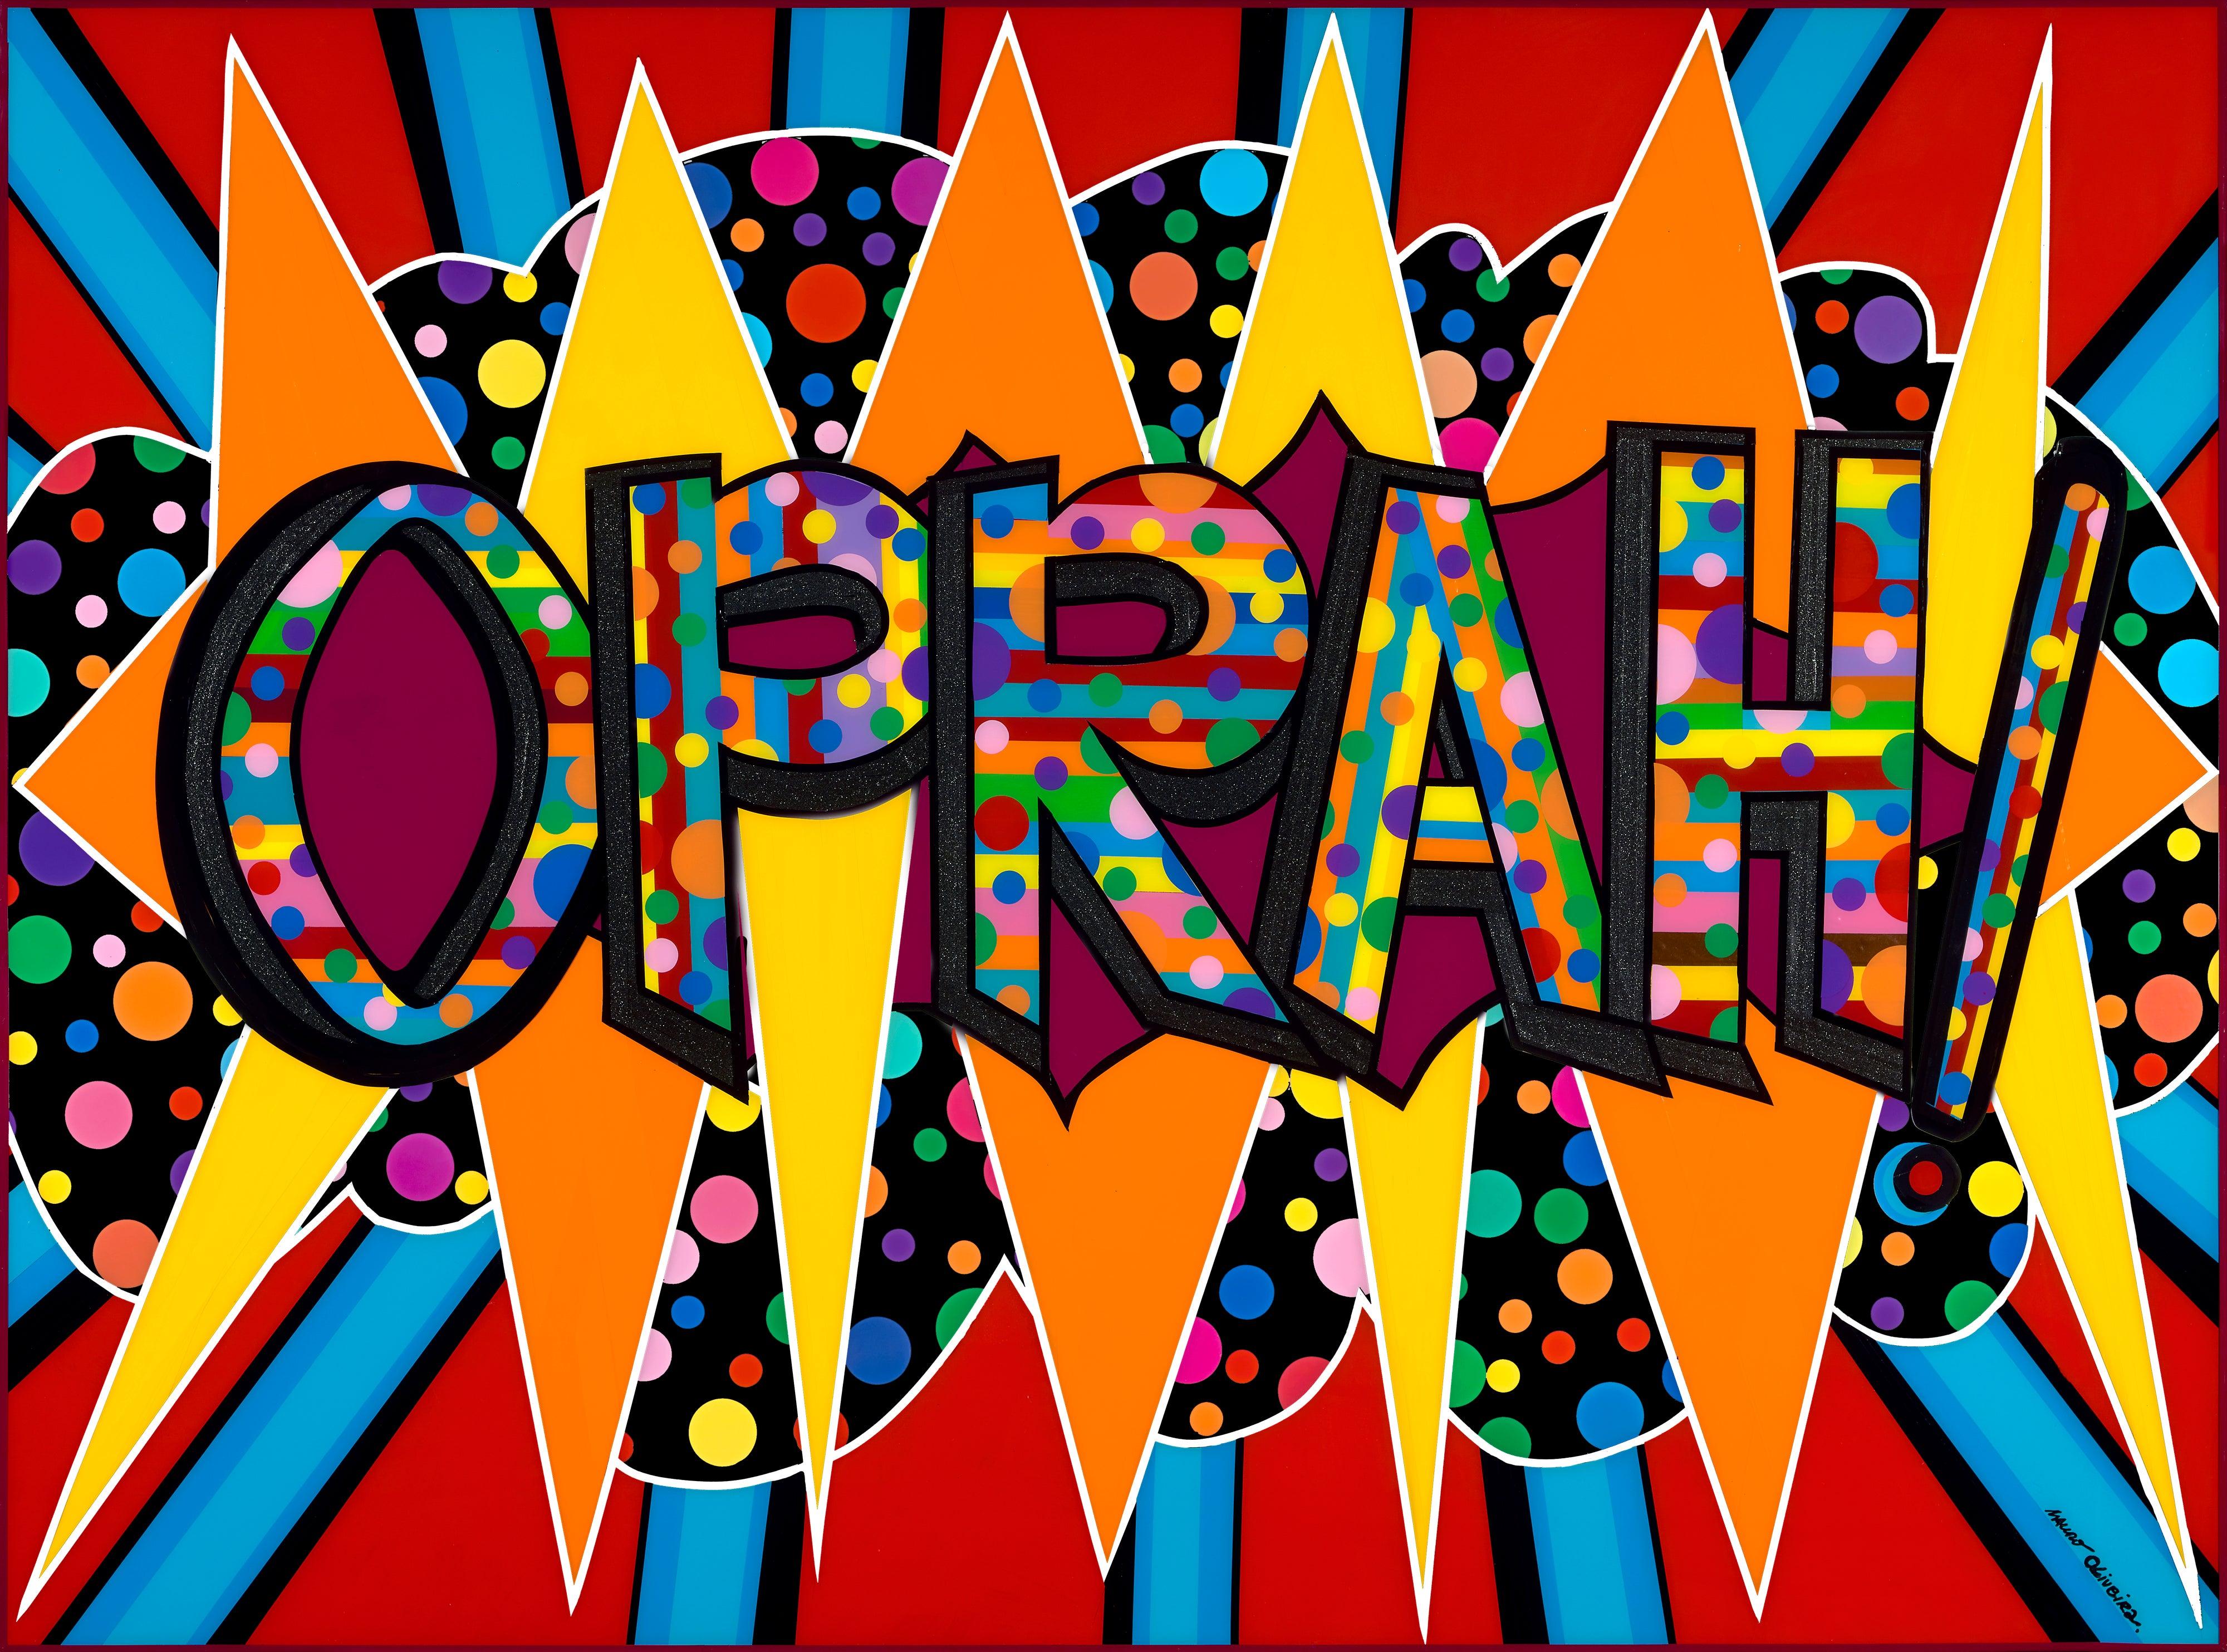 Abstract Print Mauro Oliveira - Oprah ! A True Pop Icon III (Edition limitée)